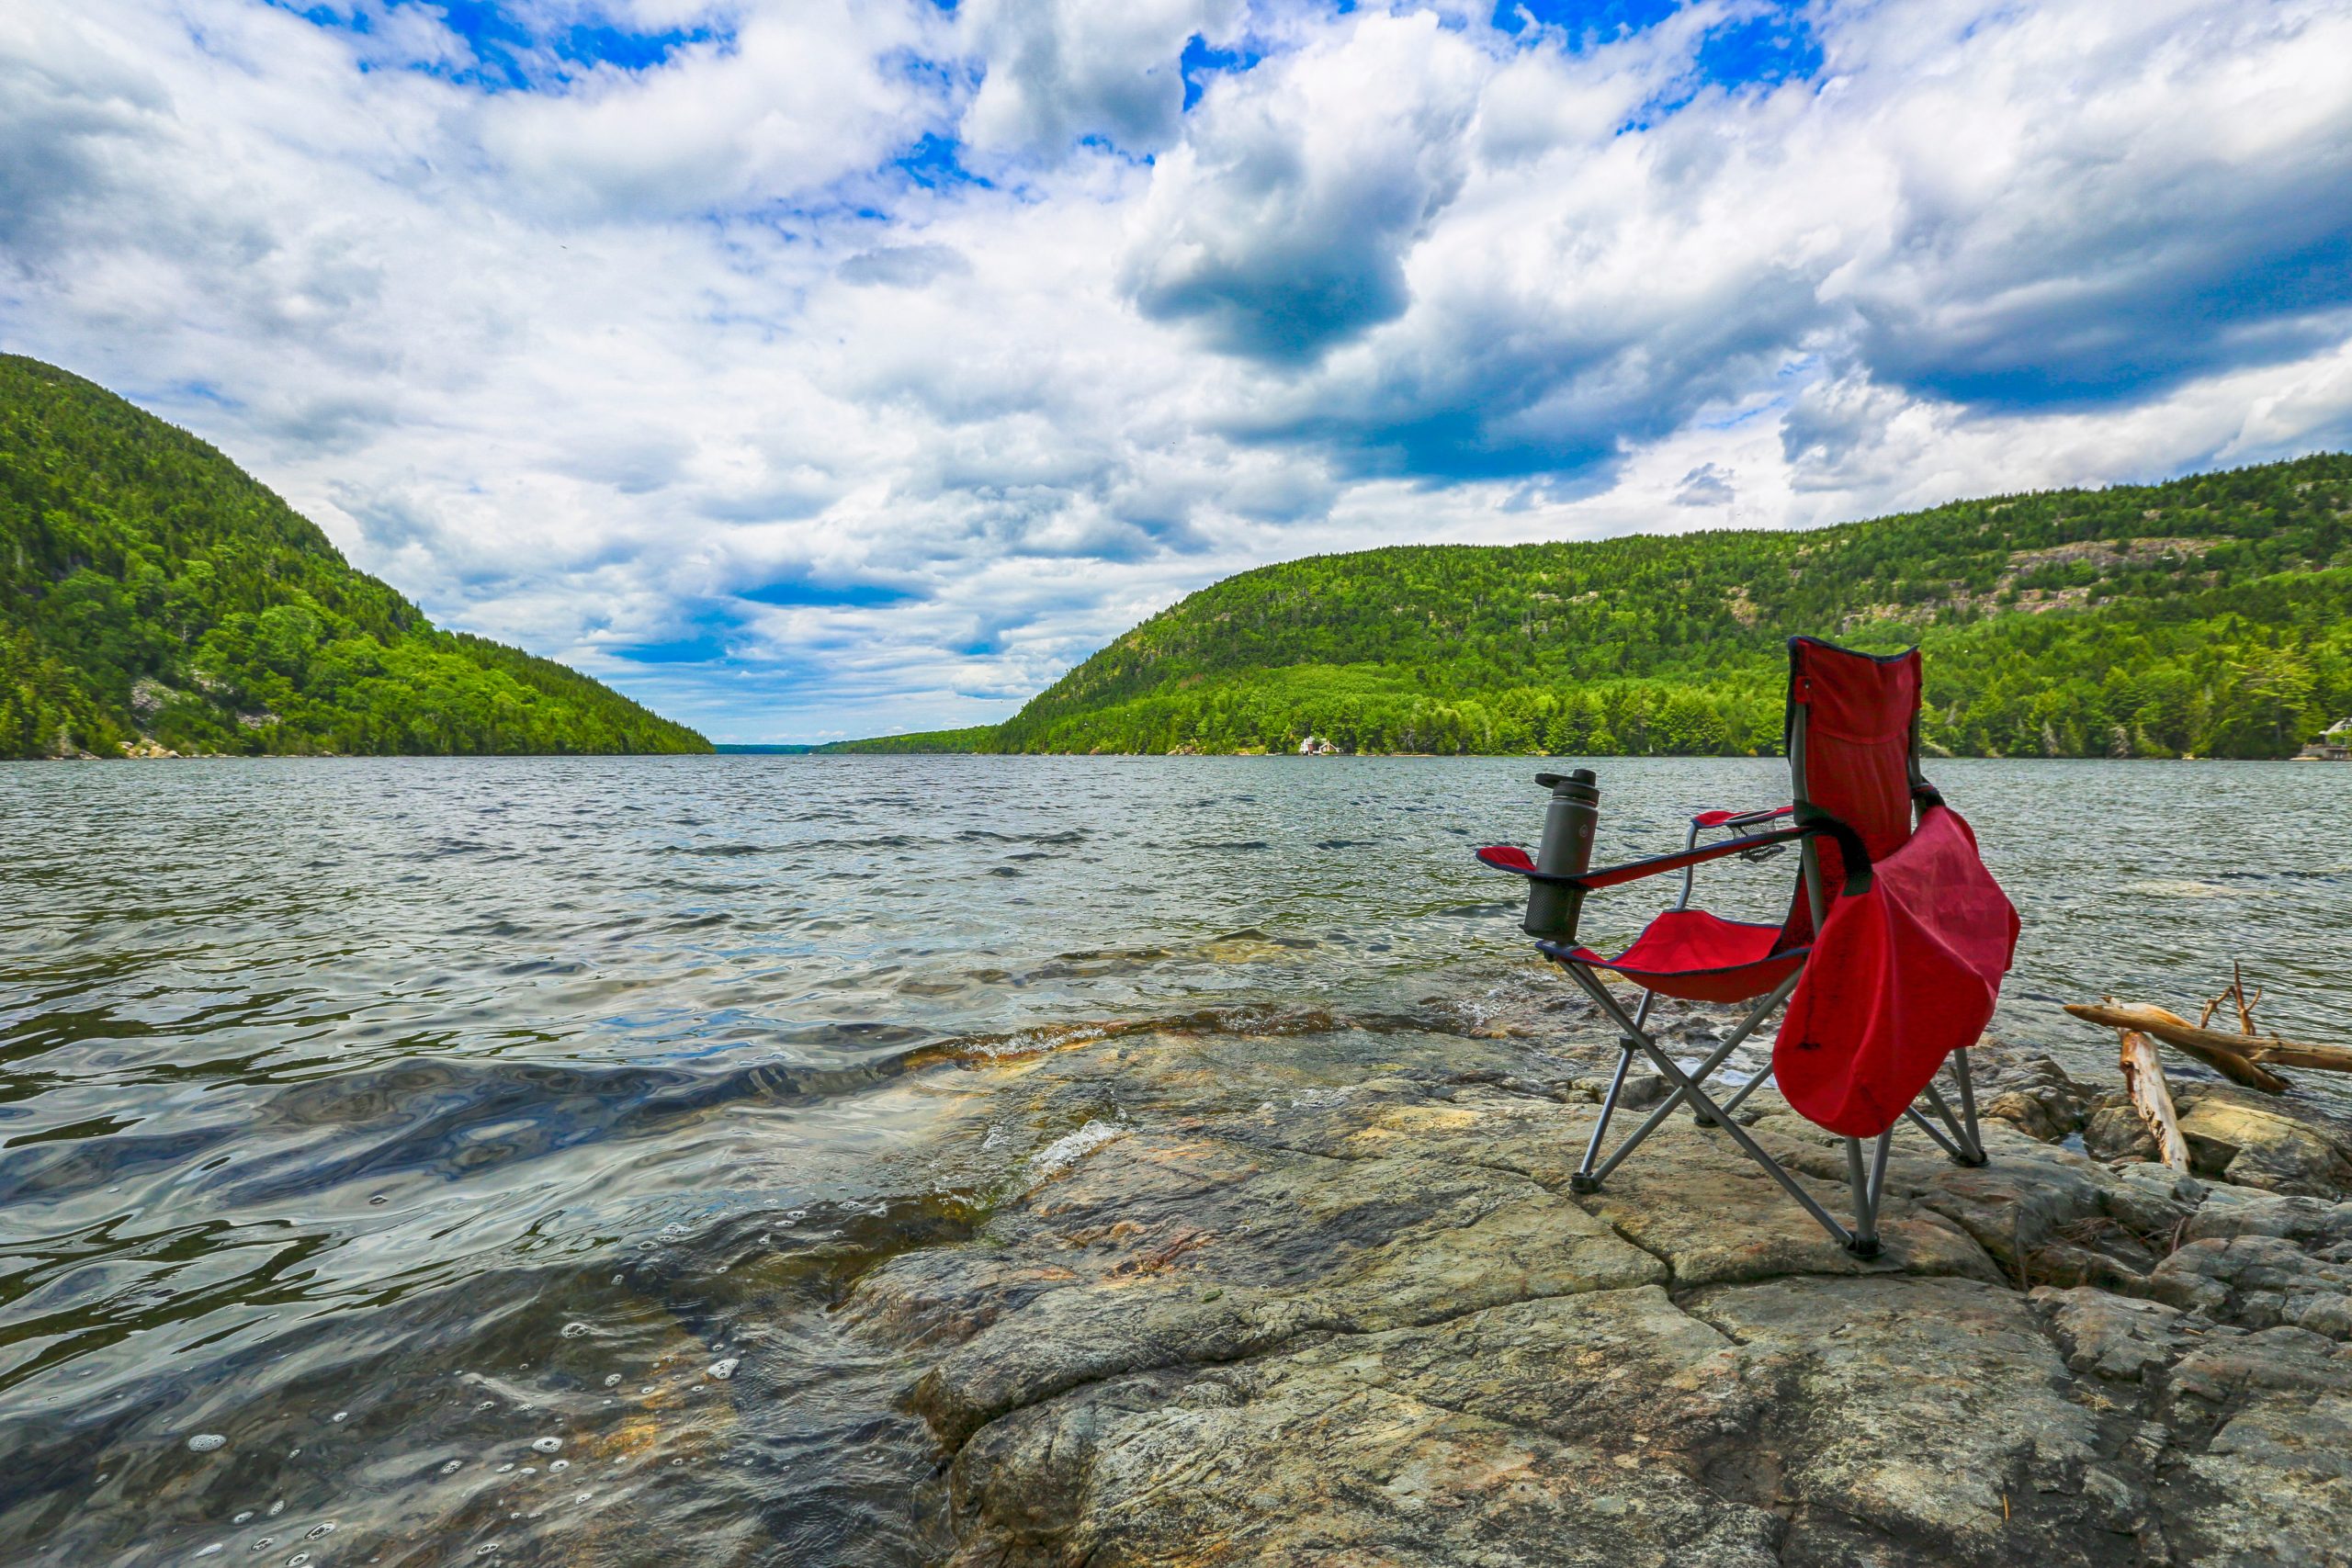 Camping chair on a rock facing a body of water.